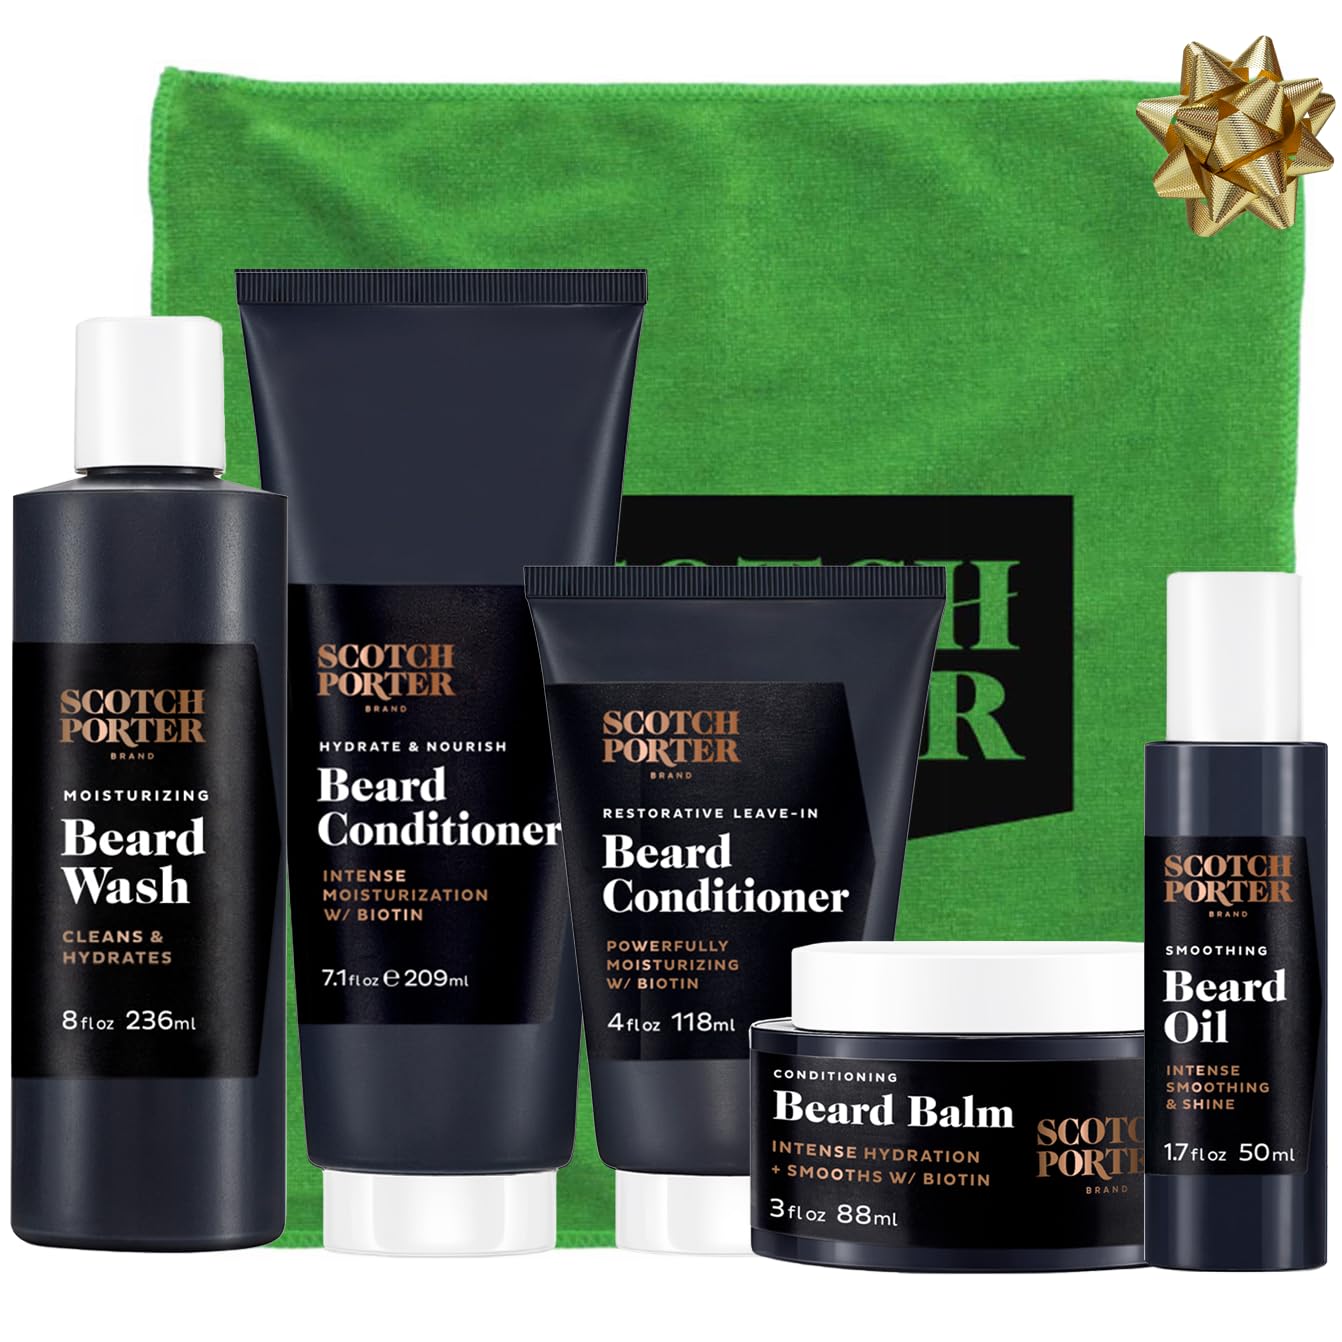 Scotch Porter Get Bearded Collection | Includes Beard Wash, Conditioner, Balm, Serum, Microfiber Towel | Free of Parabens, Sulfates & Silicones | Vegan